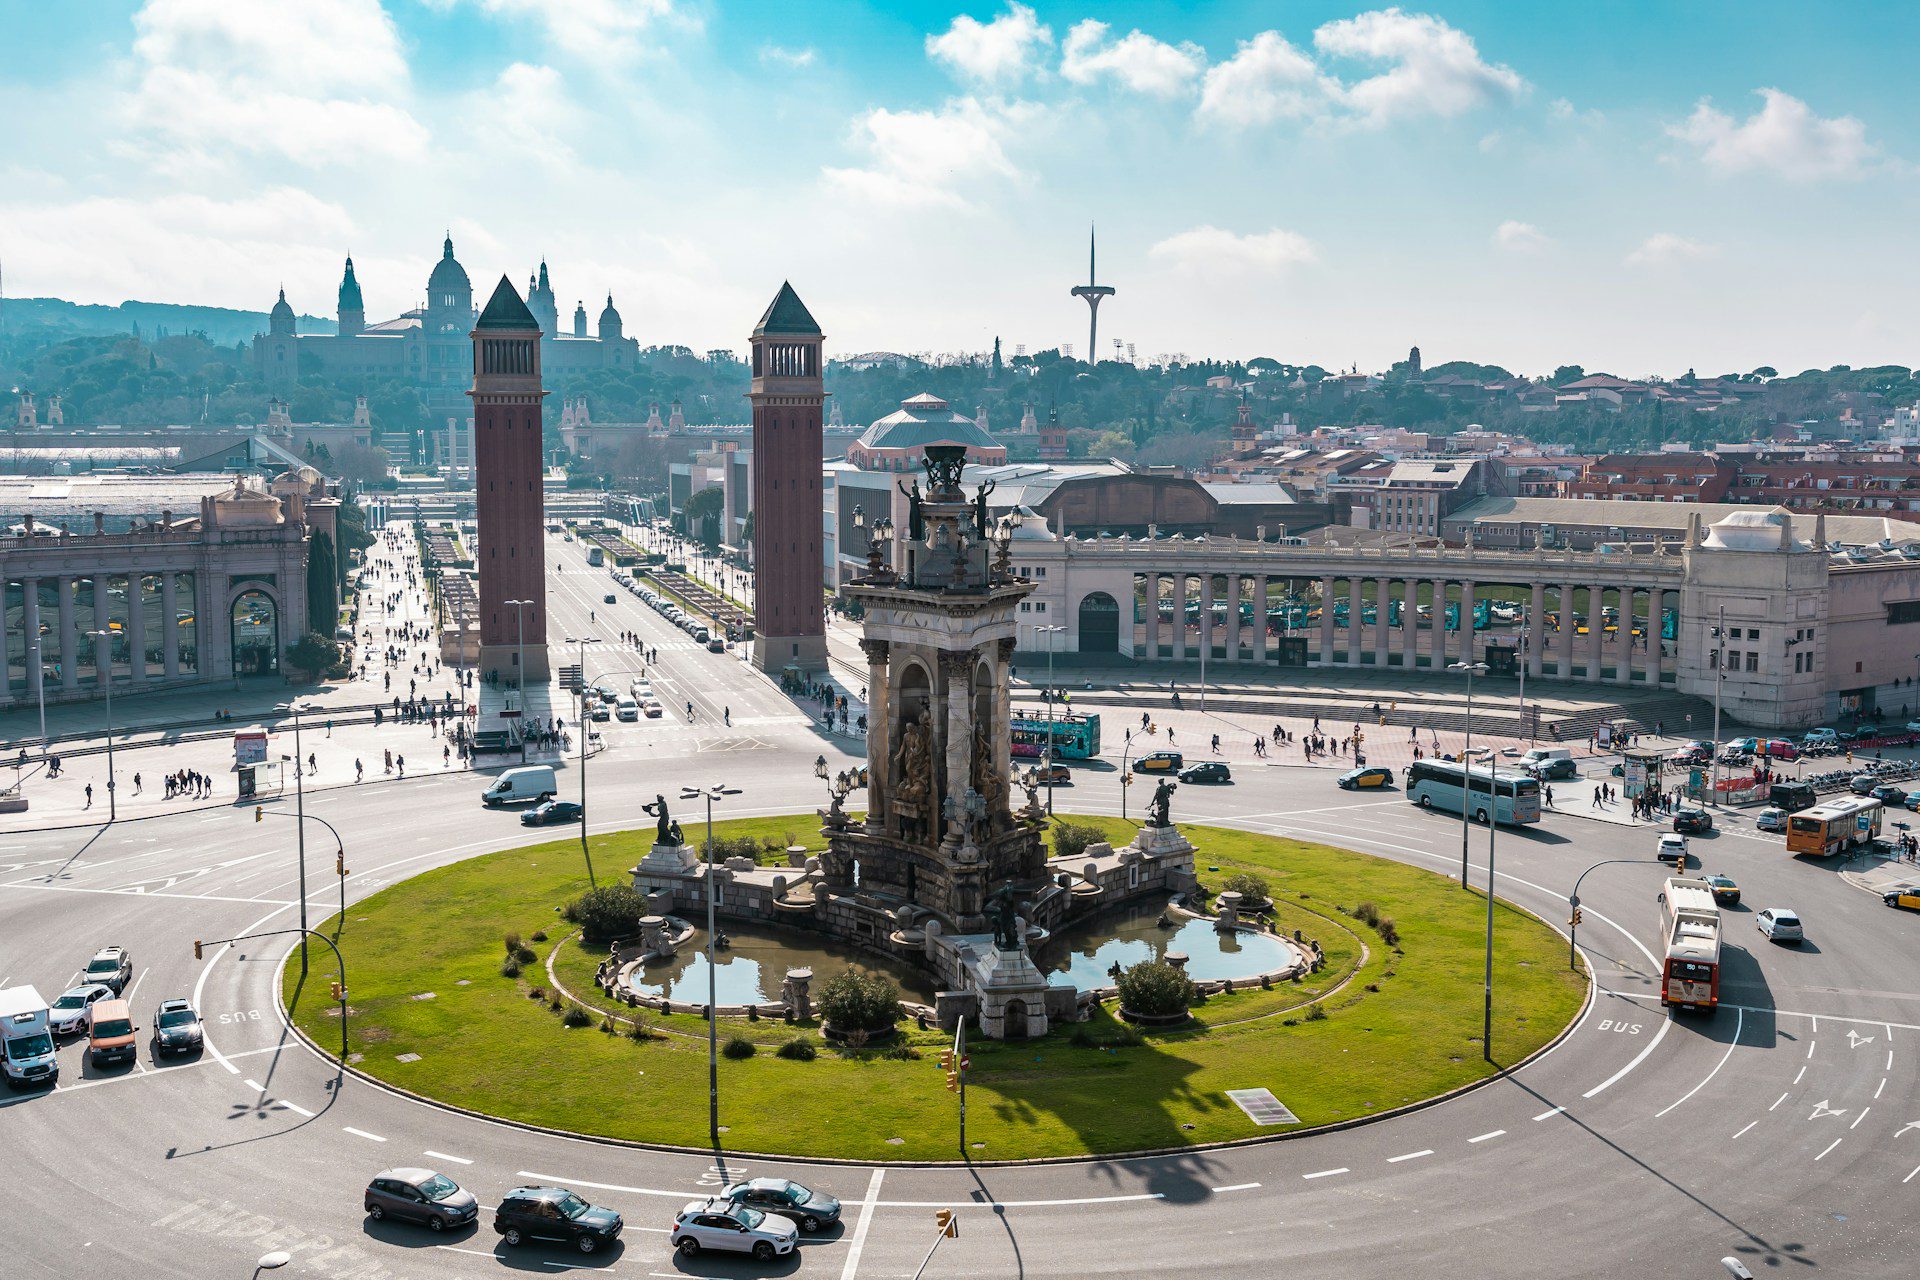 Image of Plaza de España in central Barcelona, with a grassy roundabout in the centre and two towers either side of the main exit.